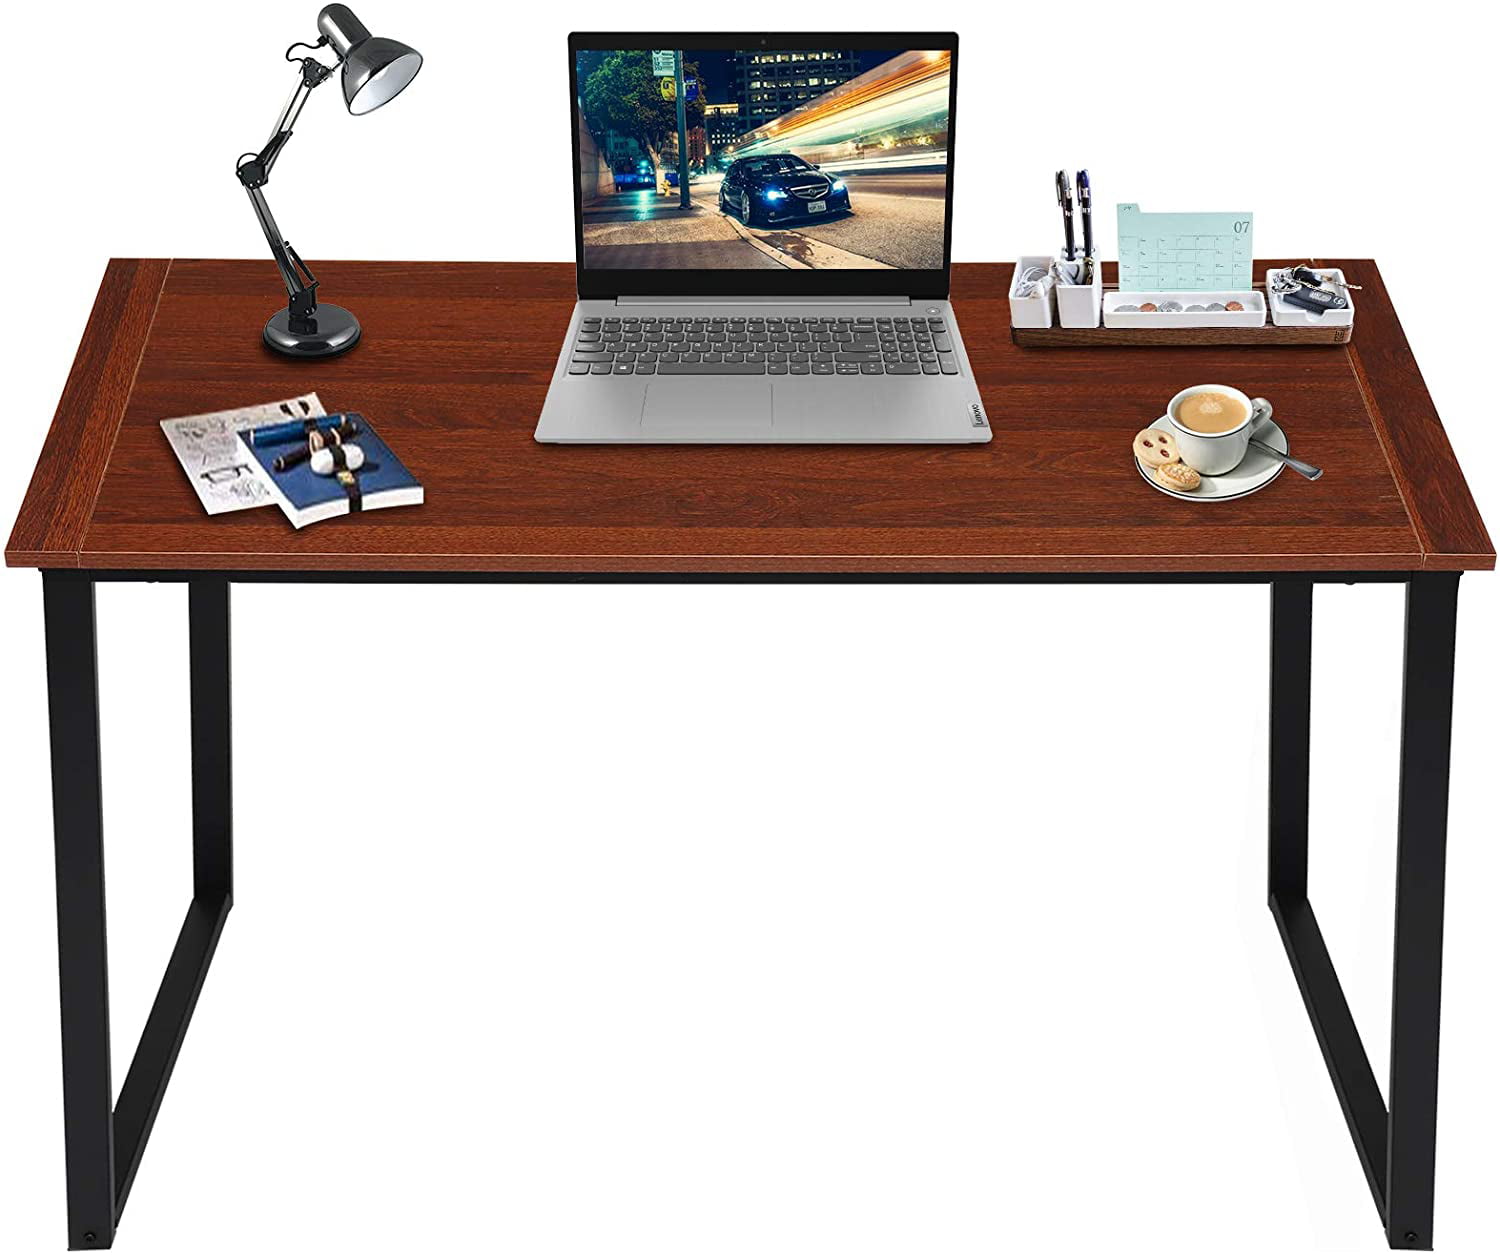 Teak Computer Desk 47 Computer Work Station Gaming Desk with Headphone Hook Work Table Sturdy Computer Table Writing Desk for Home Office 